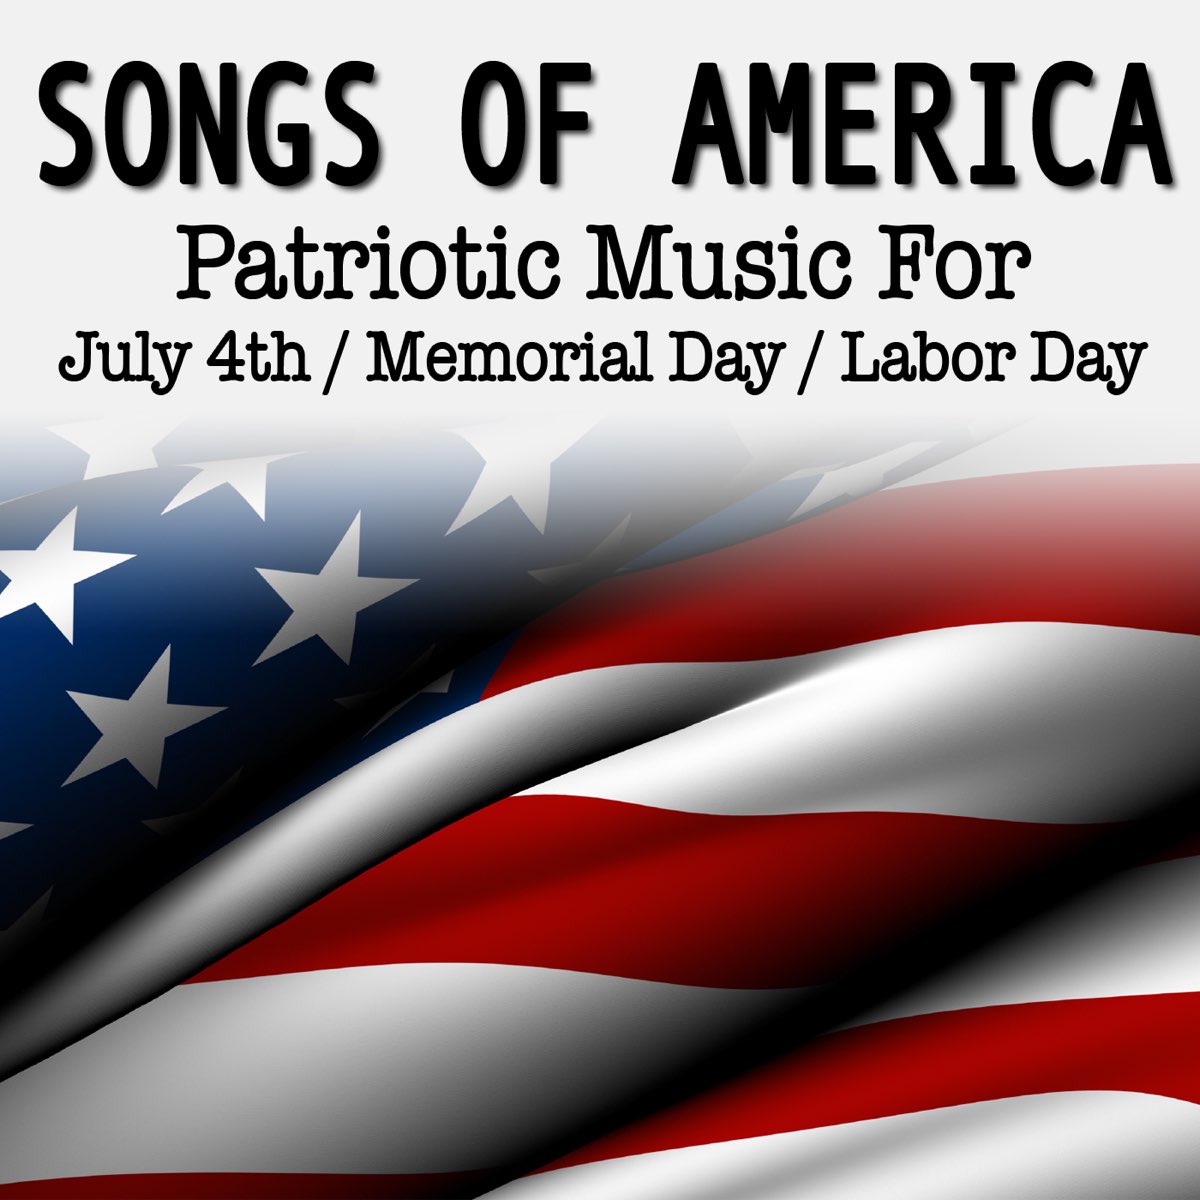 Songs of America: Patriotic Music For July 4th, Memorial Day & Labor Day -  Album by Spirit of America Ensemble - Apple Music